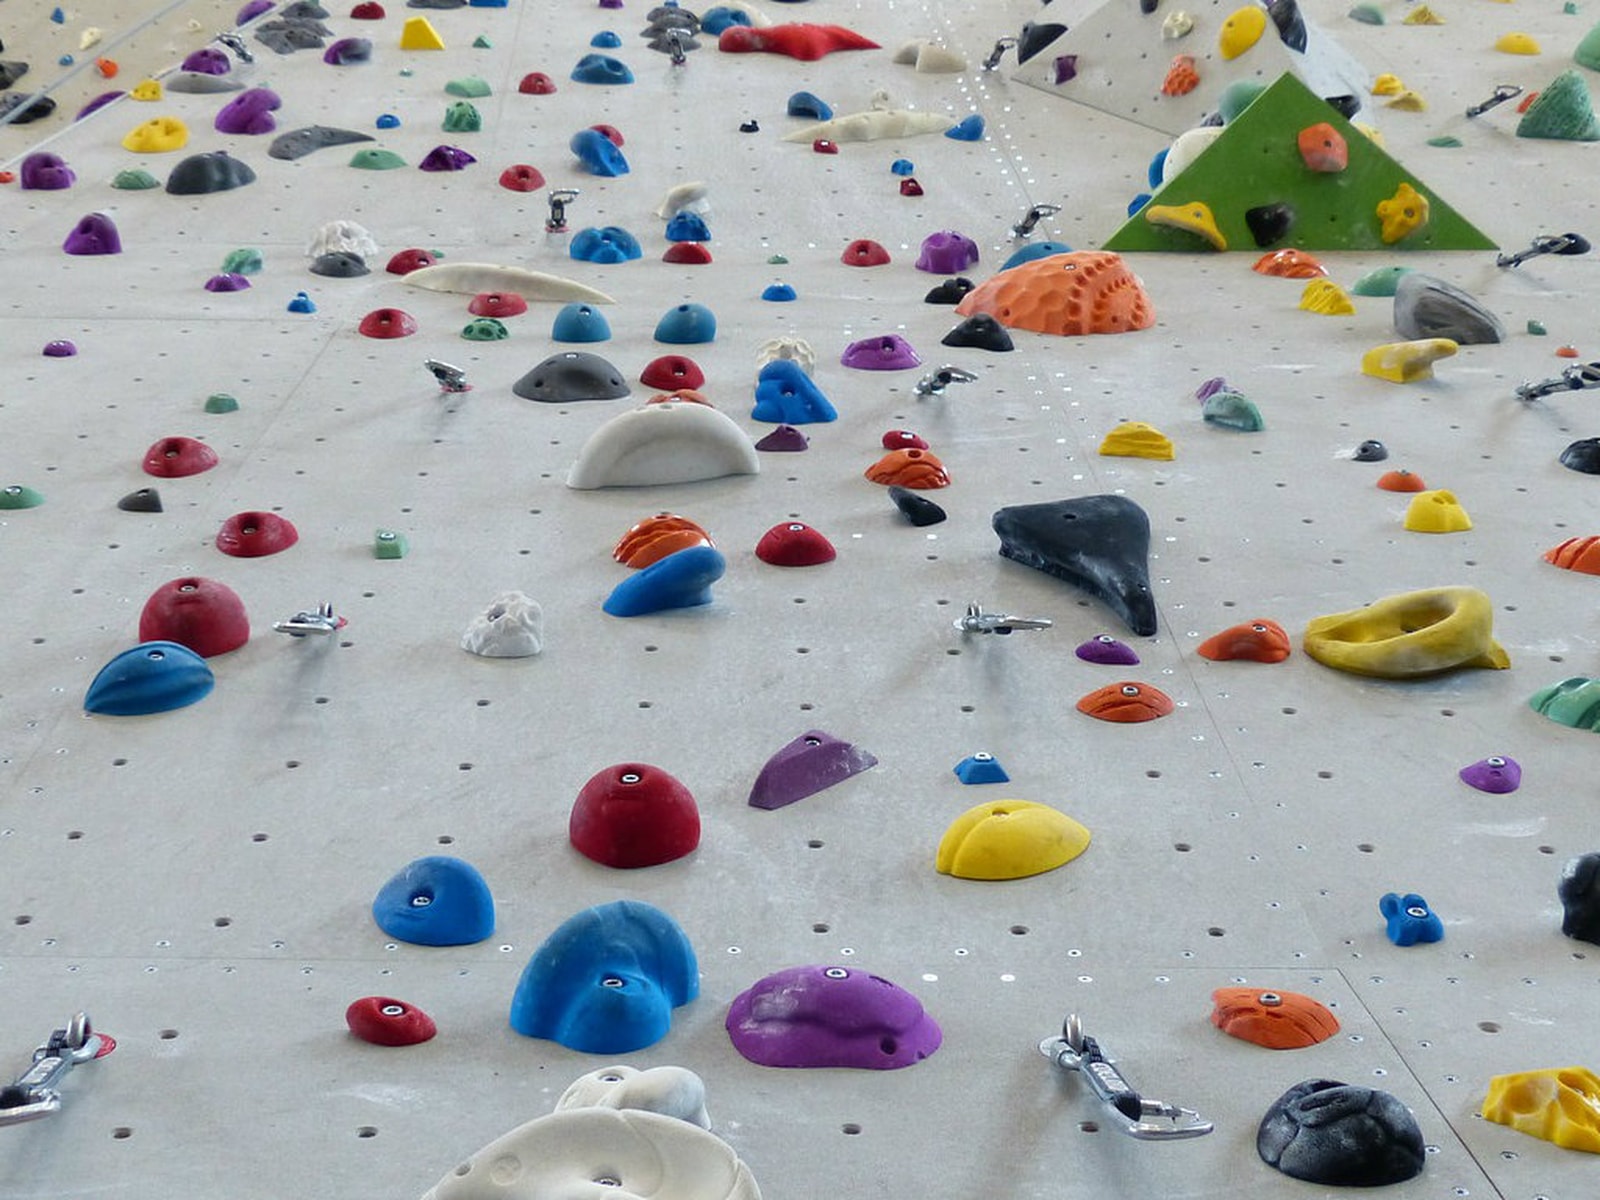 Climbing hall and Sportcenter